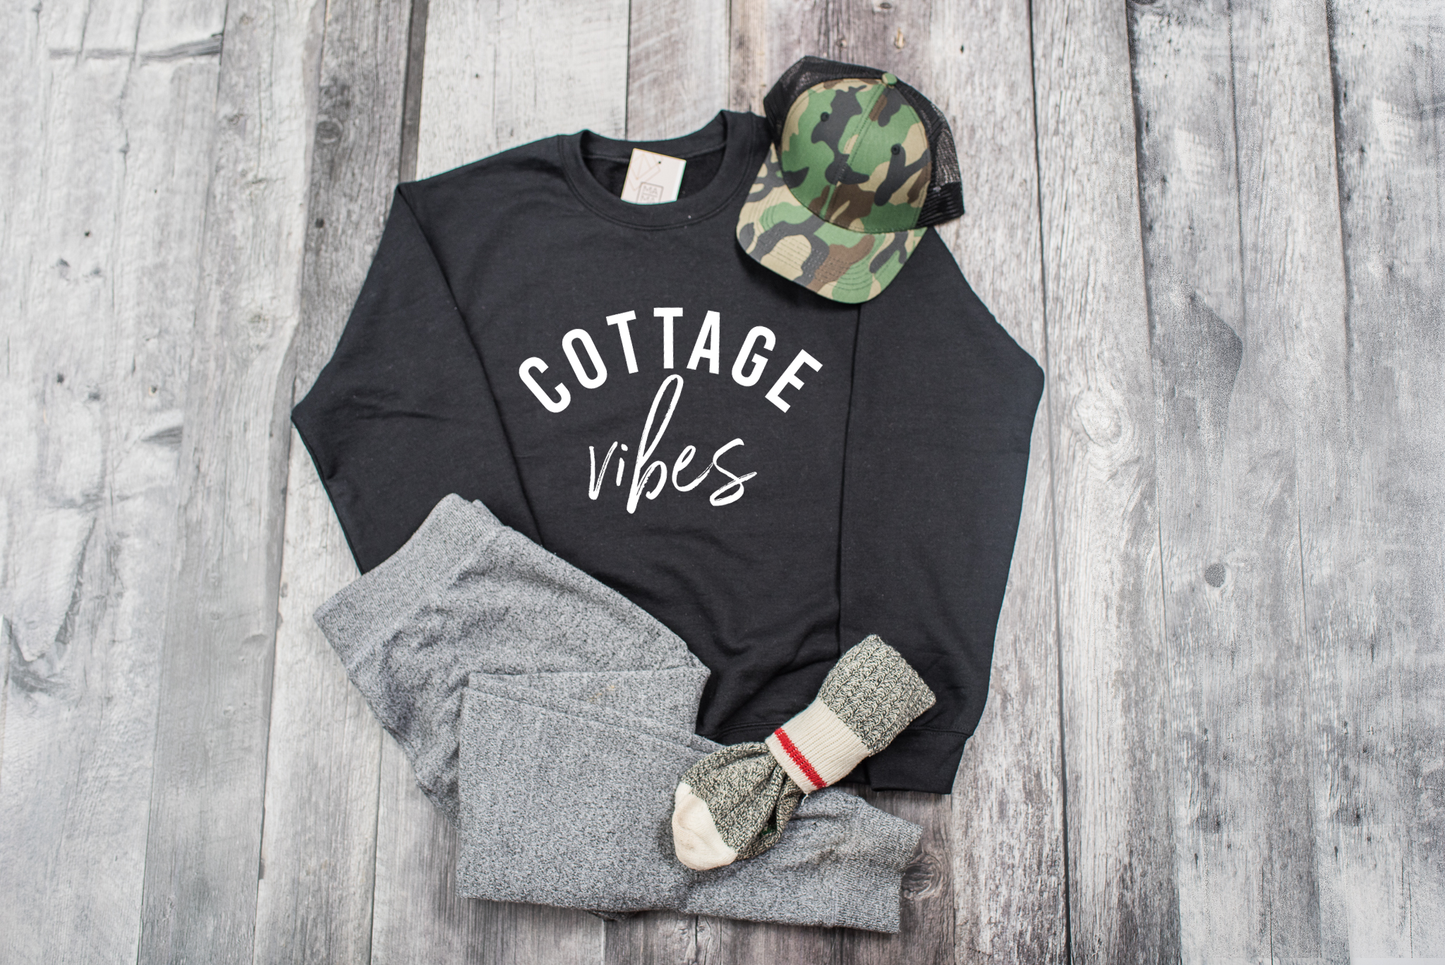 Cottage Vibes Sweater